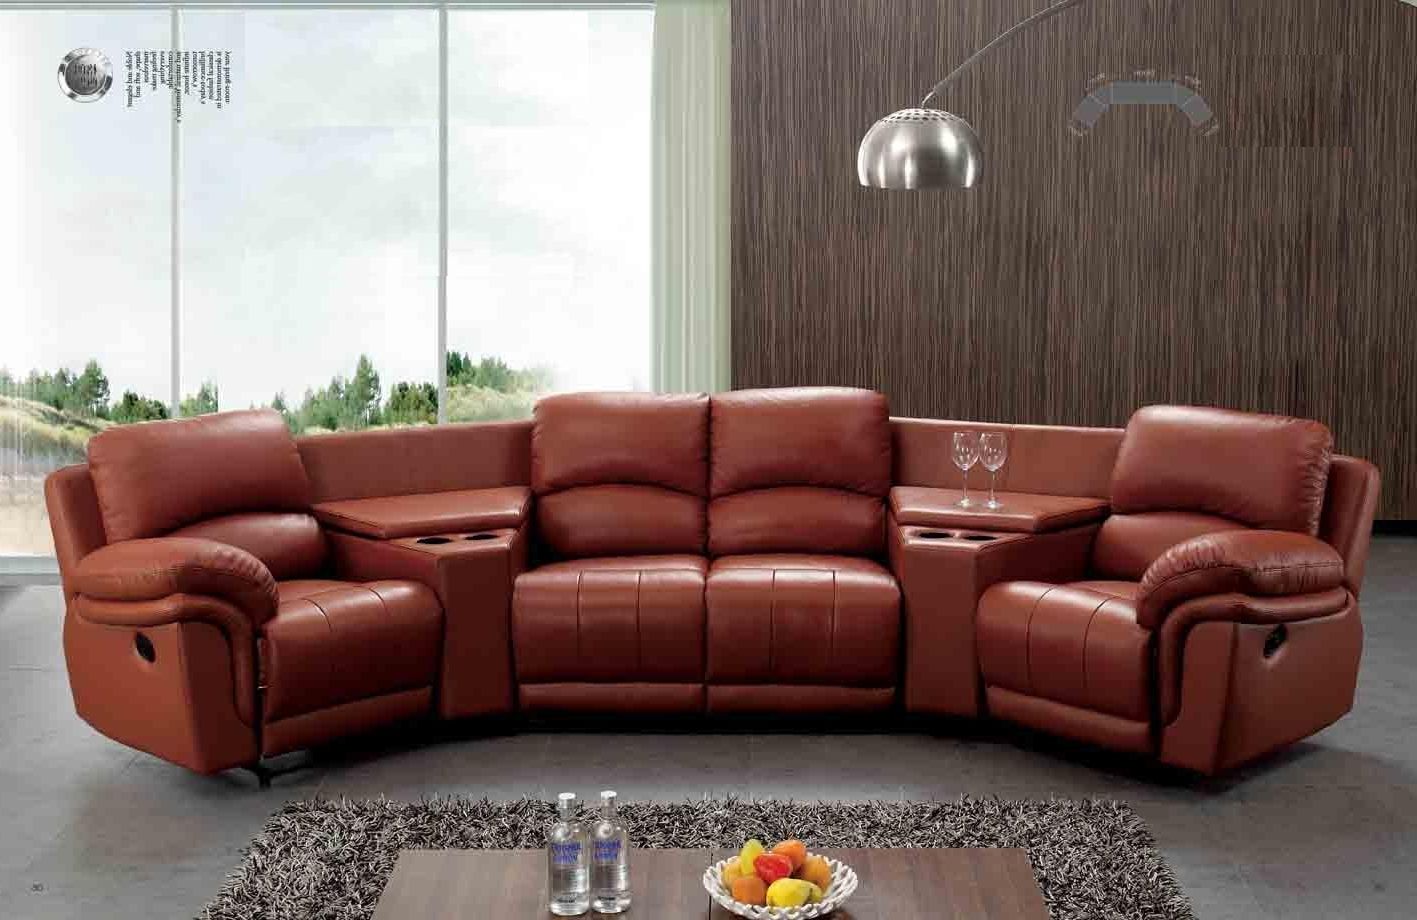 Sofa : Really Cool Desk Chairs Single Bed Chair Sleeper Sectional For Most Current Sectional Sofas With Electric Recliners (Photo 4 of 15)